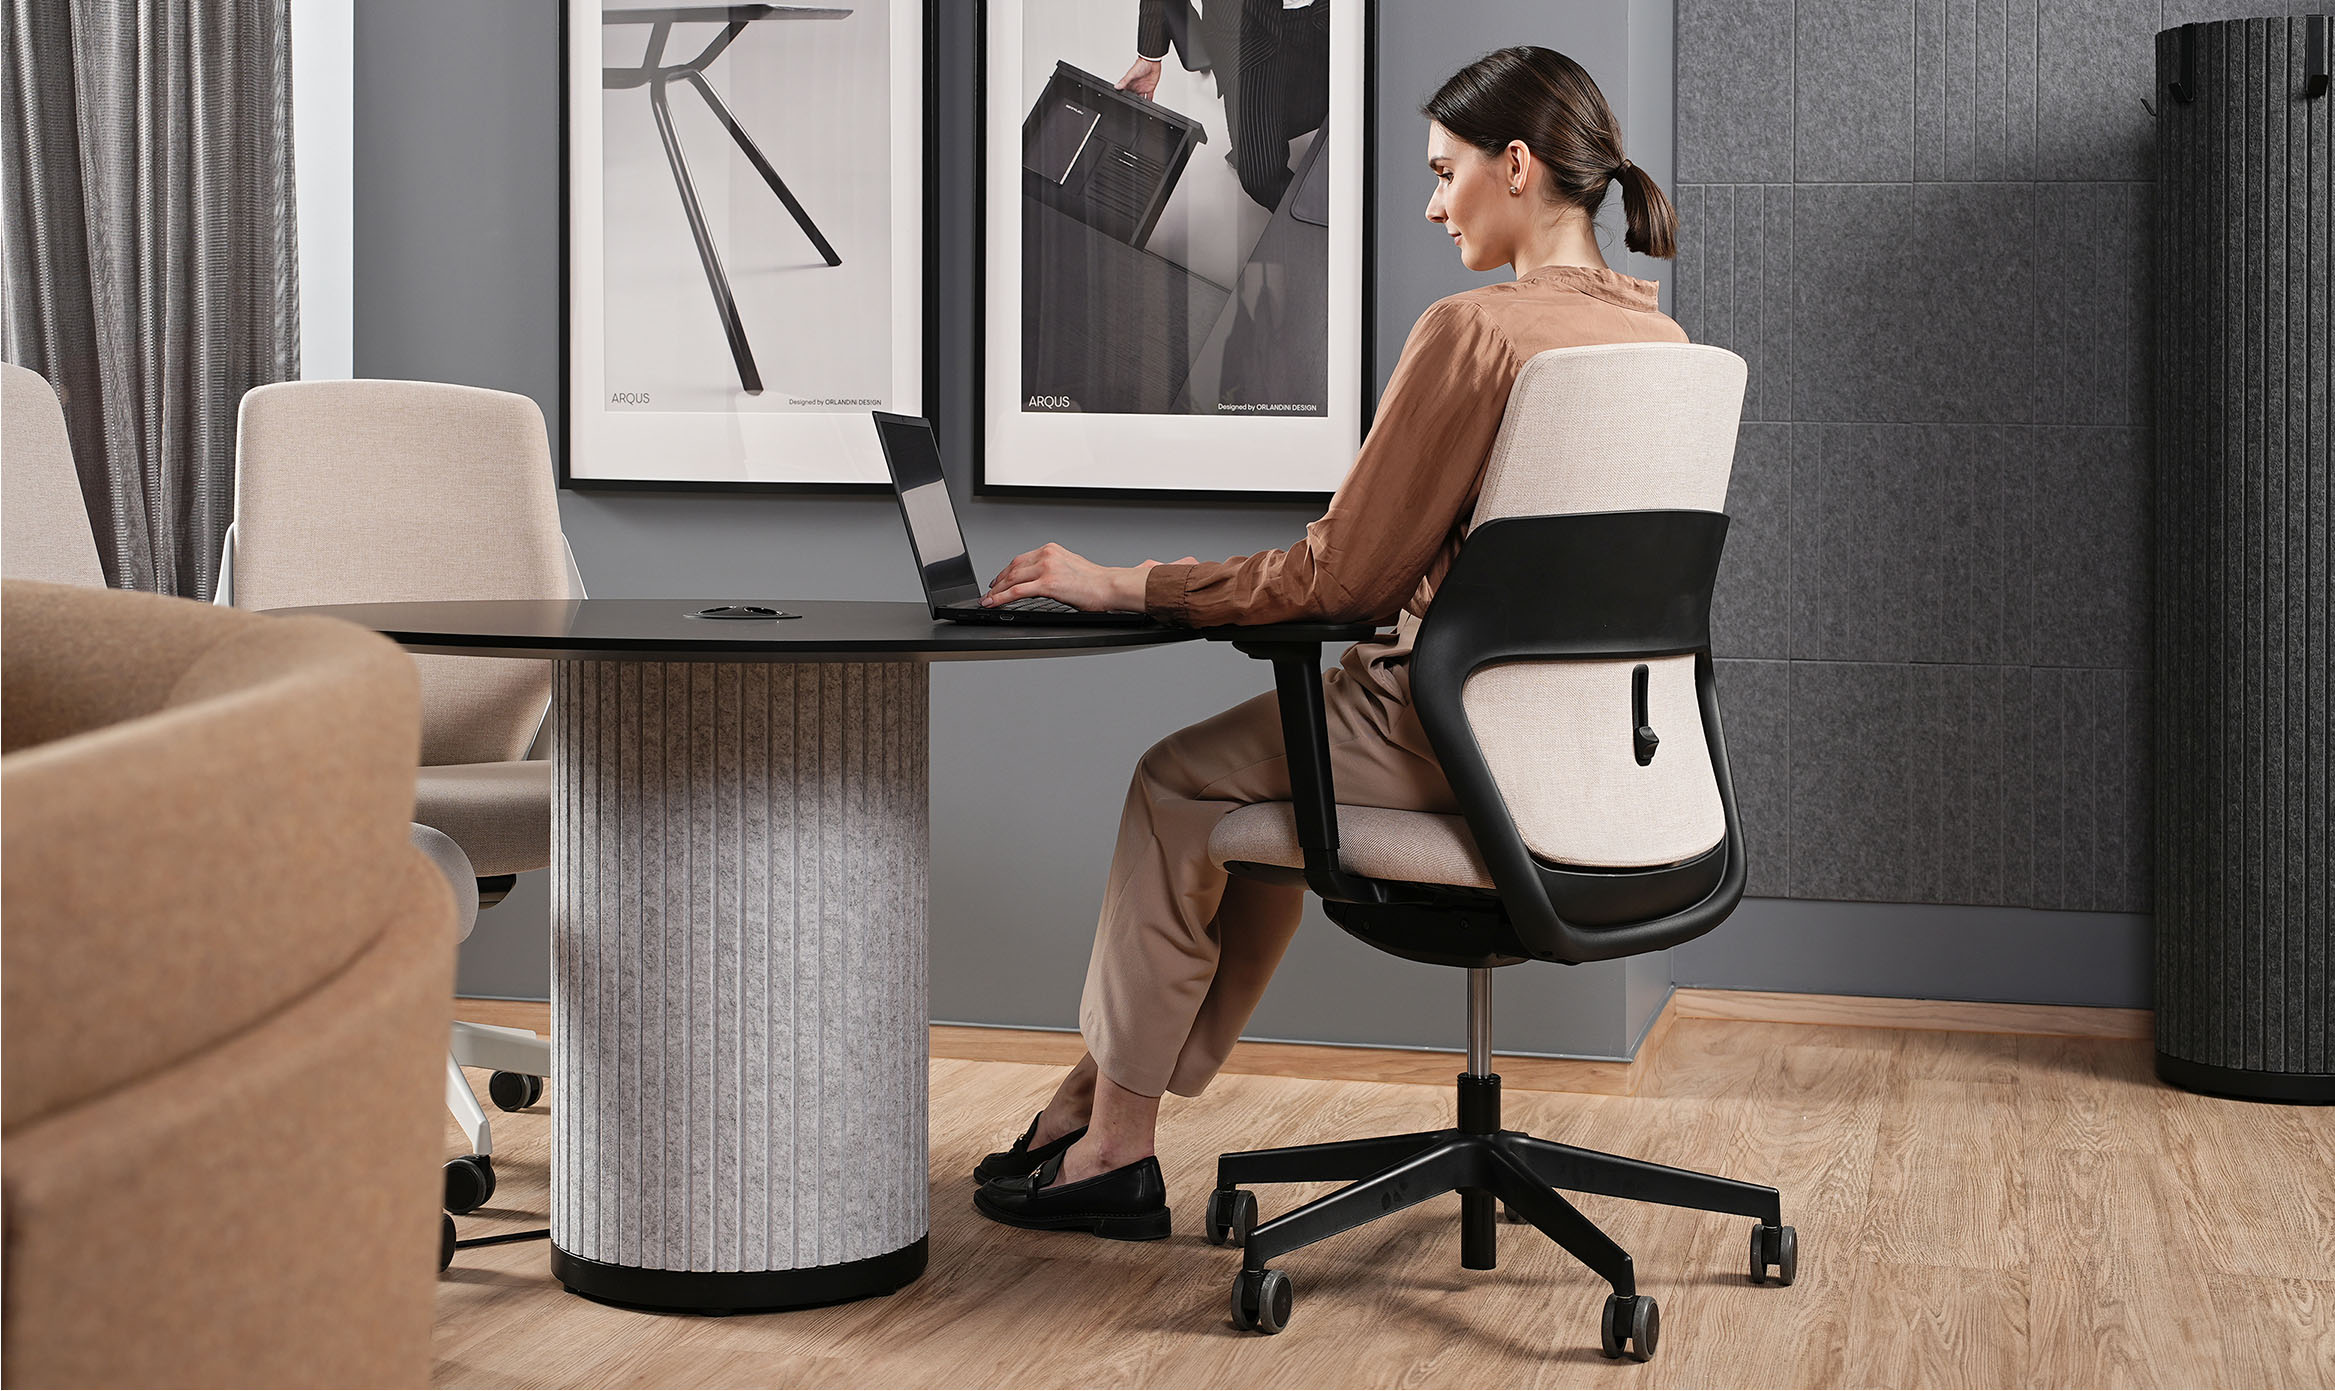 A woman working at a desk seated in an OFY chair designed by Alegre Design for Narbutas. The image highlights the chair's ergonomic design, adjustable lumbar support, and suitability for modern office environments.